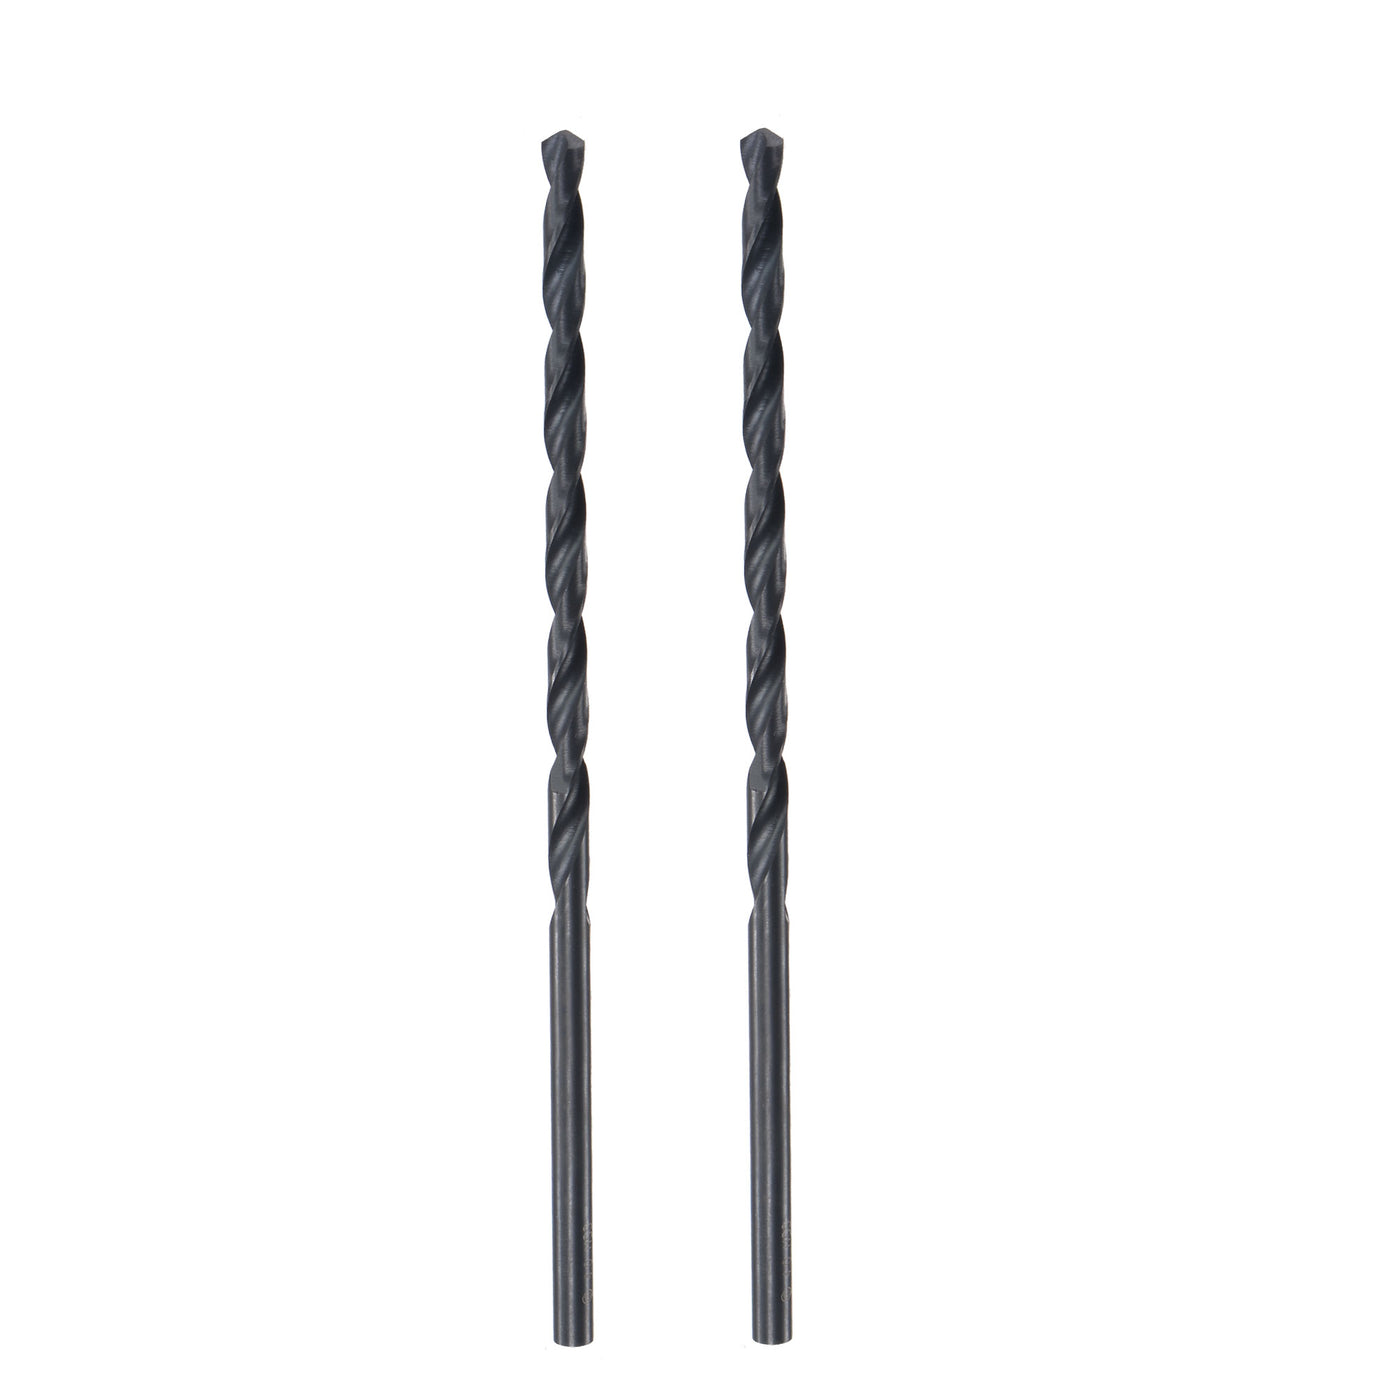 uxcell Uxcell High Speed Steel Lengthen Twist Drill Bit 4mm Fully Ground Black Oxide 2Pcs